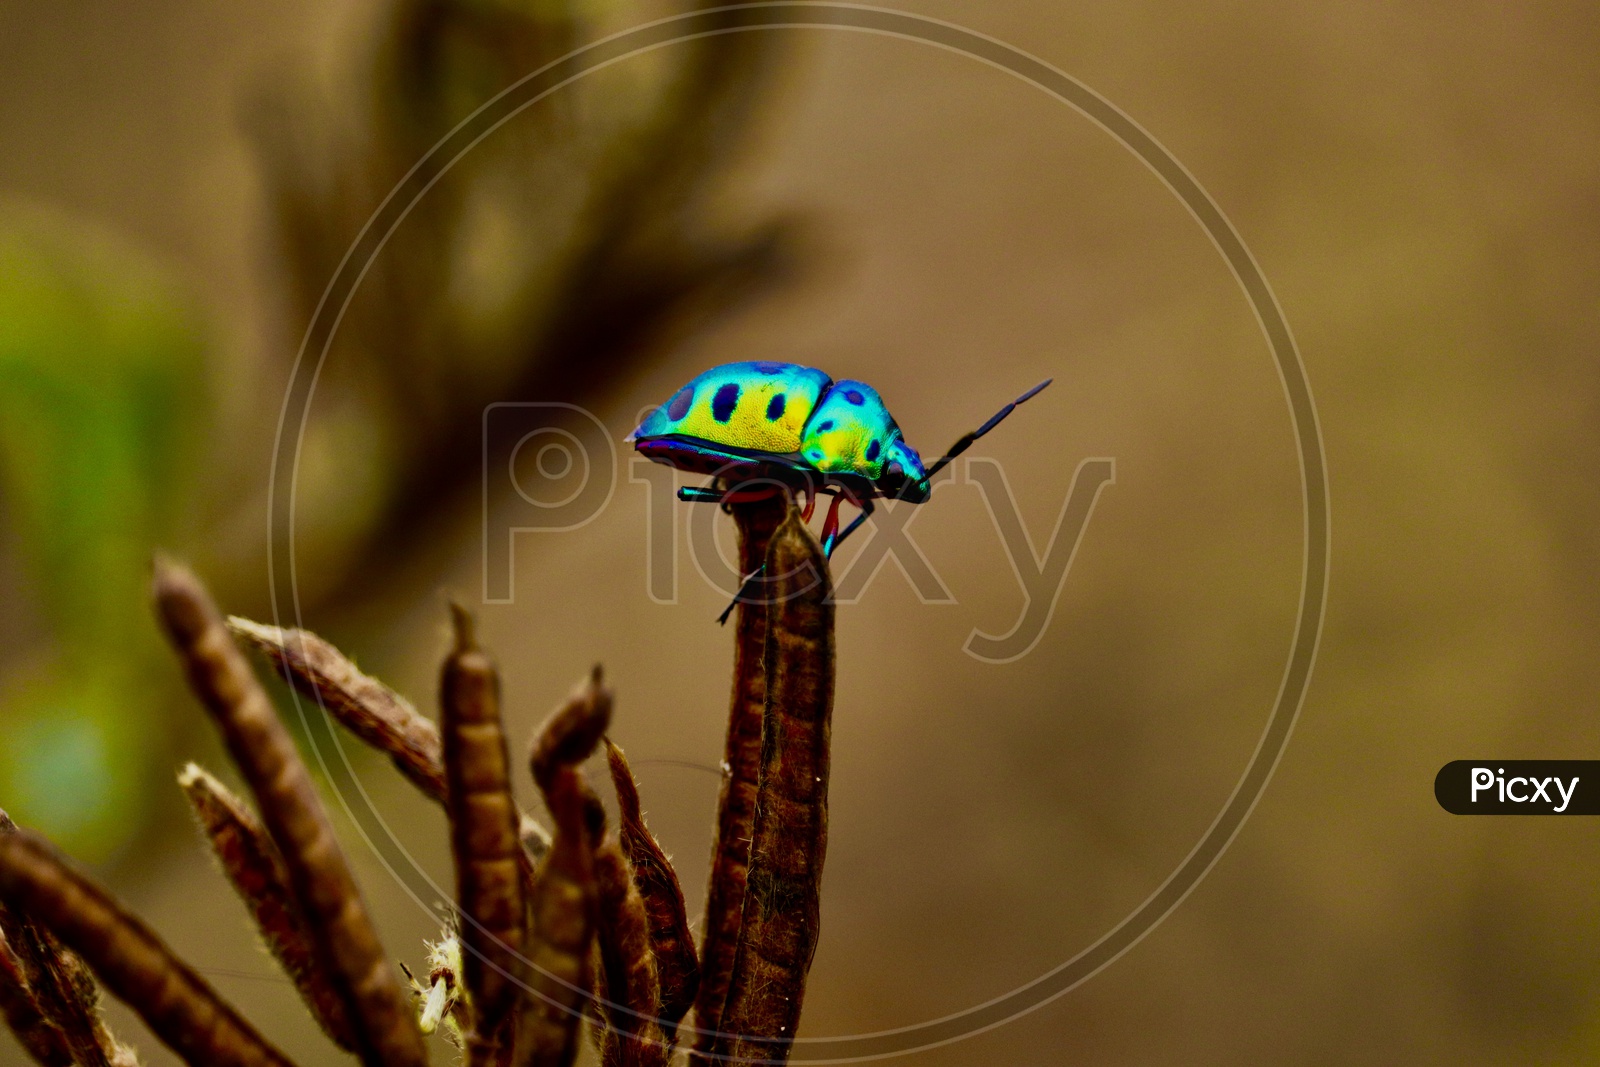 vibrant insect!